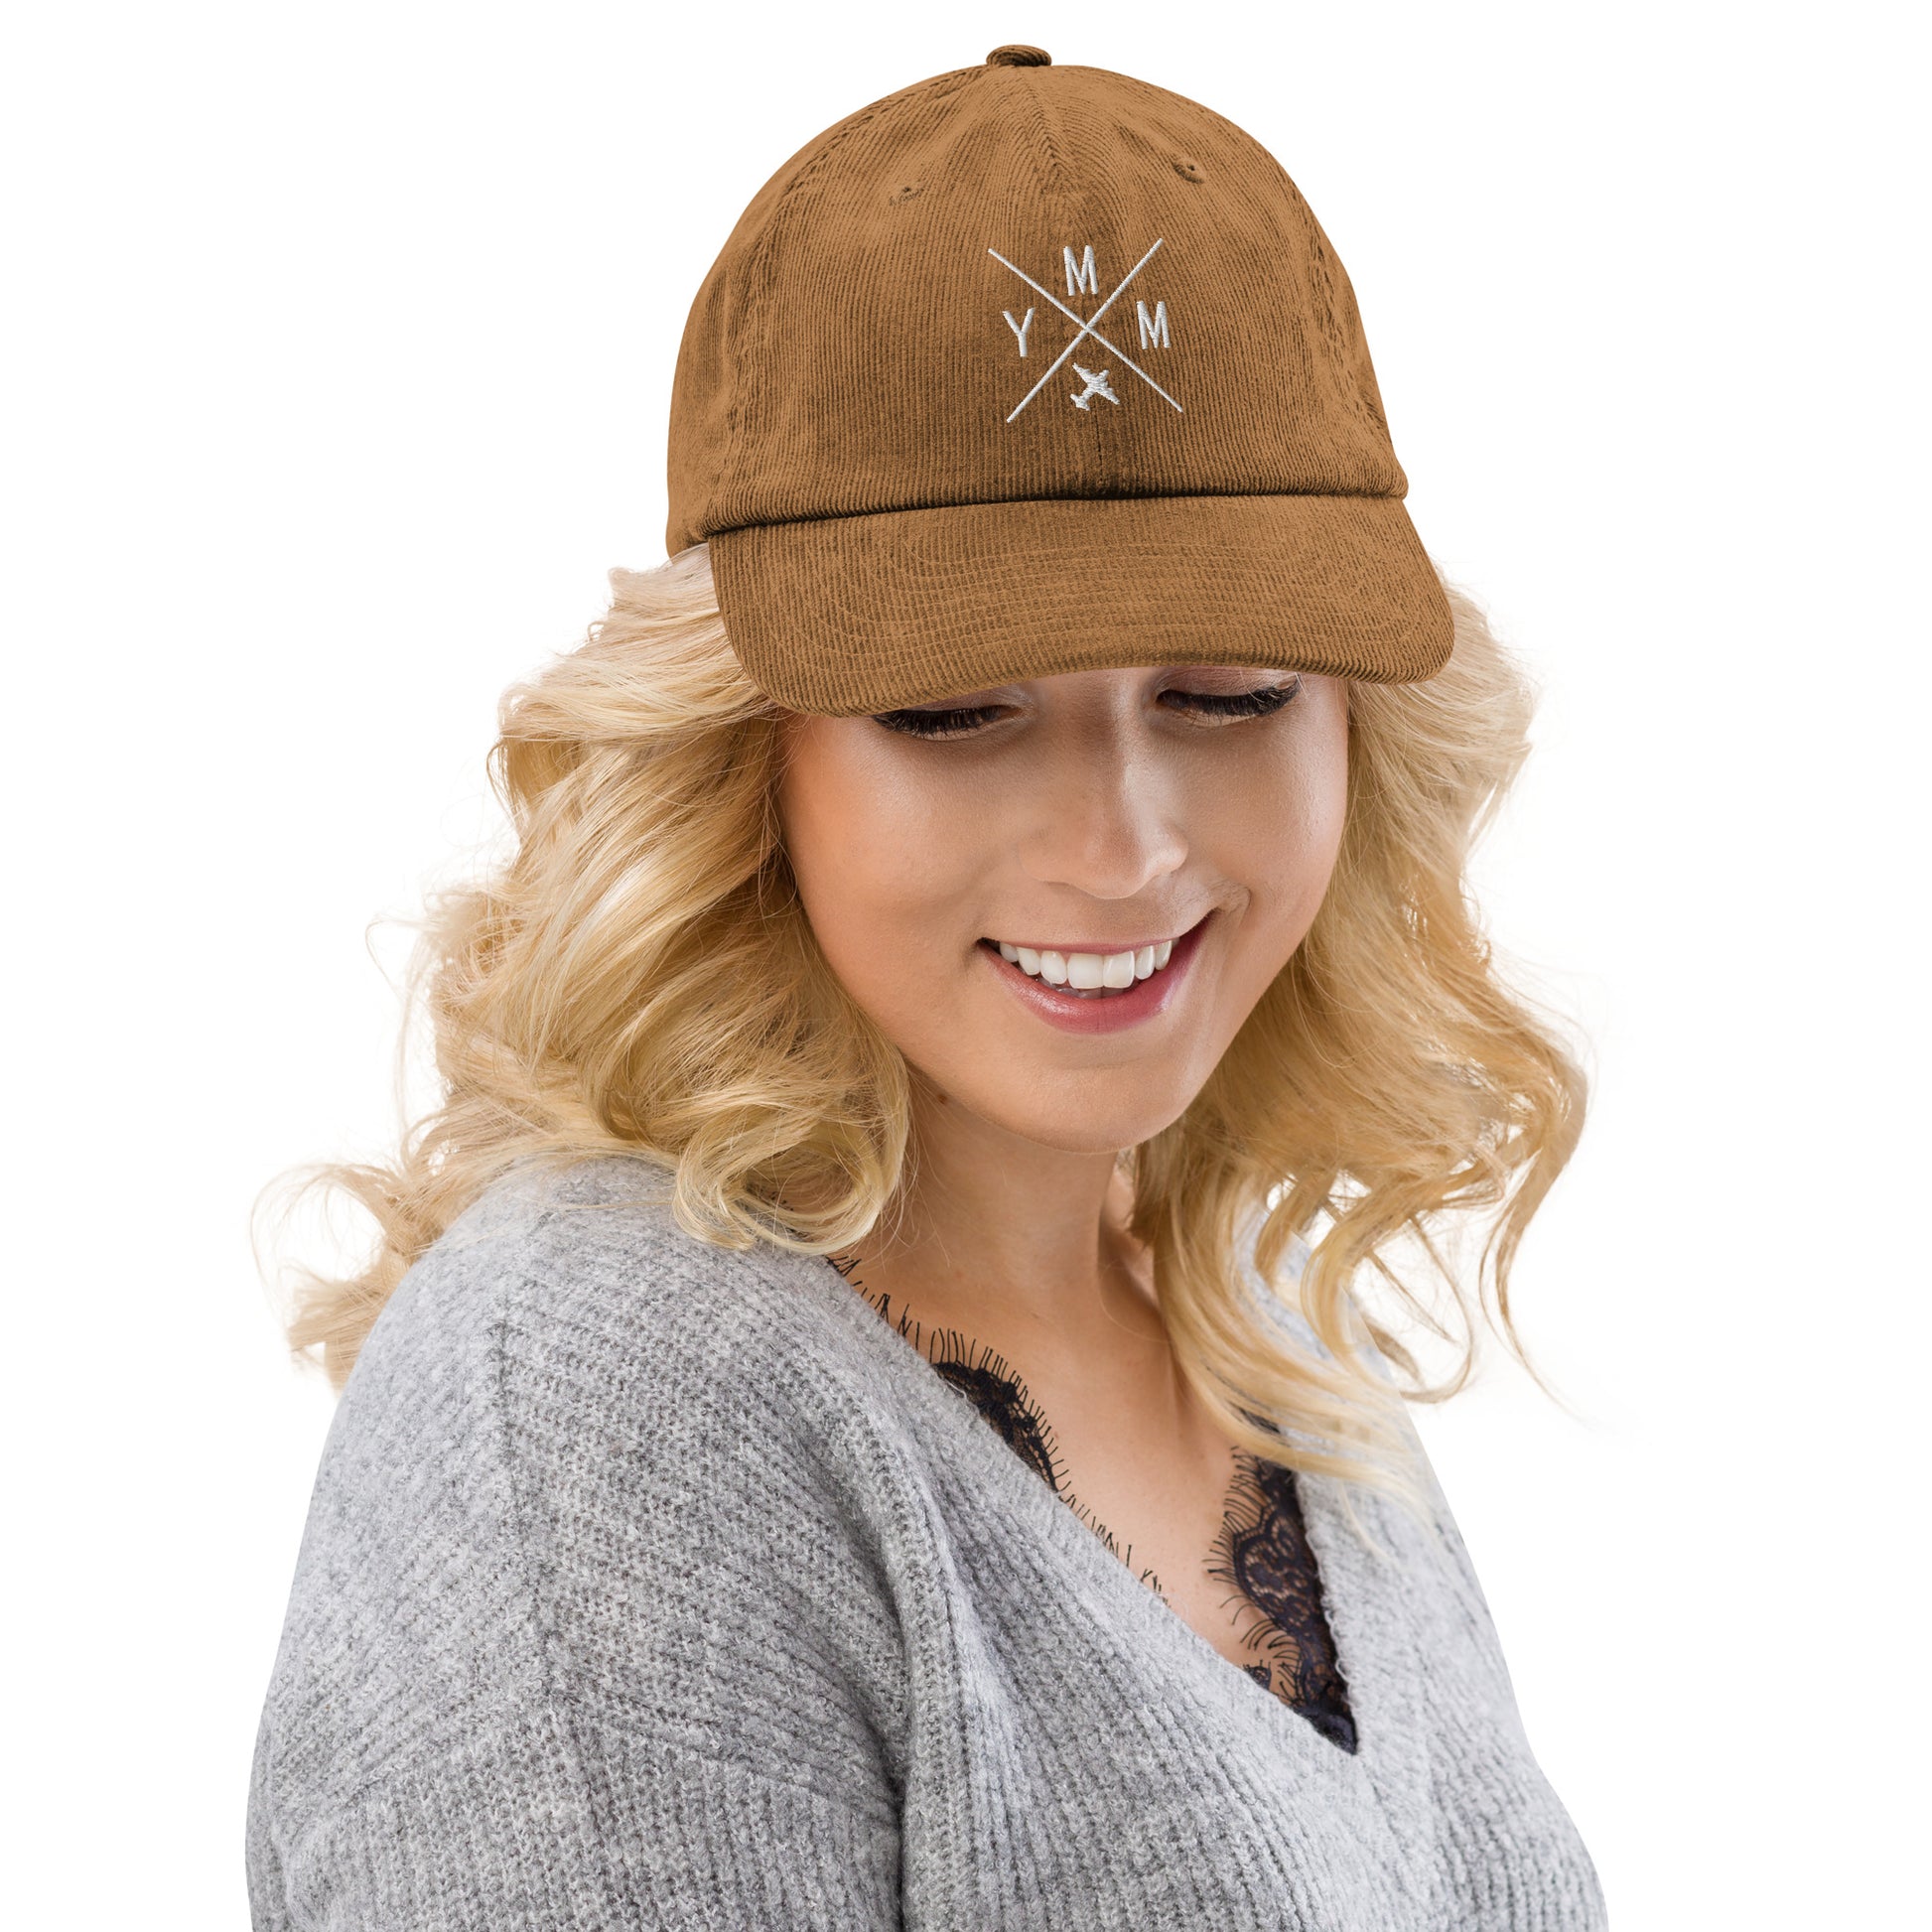 Crossed-X Corduroy Hat - White • YMM Fort McMurray • YHM Designs - Image 10